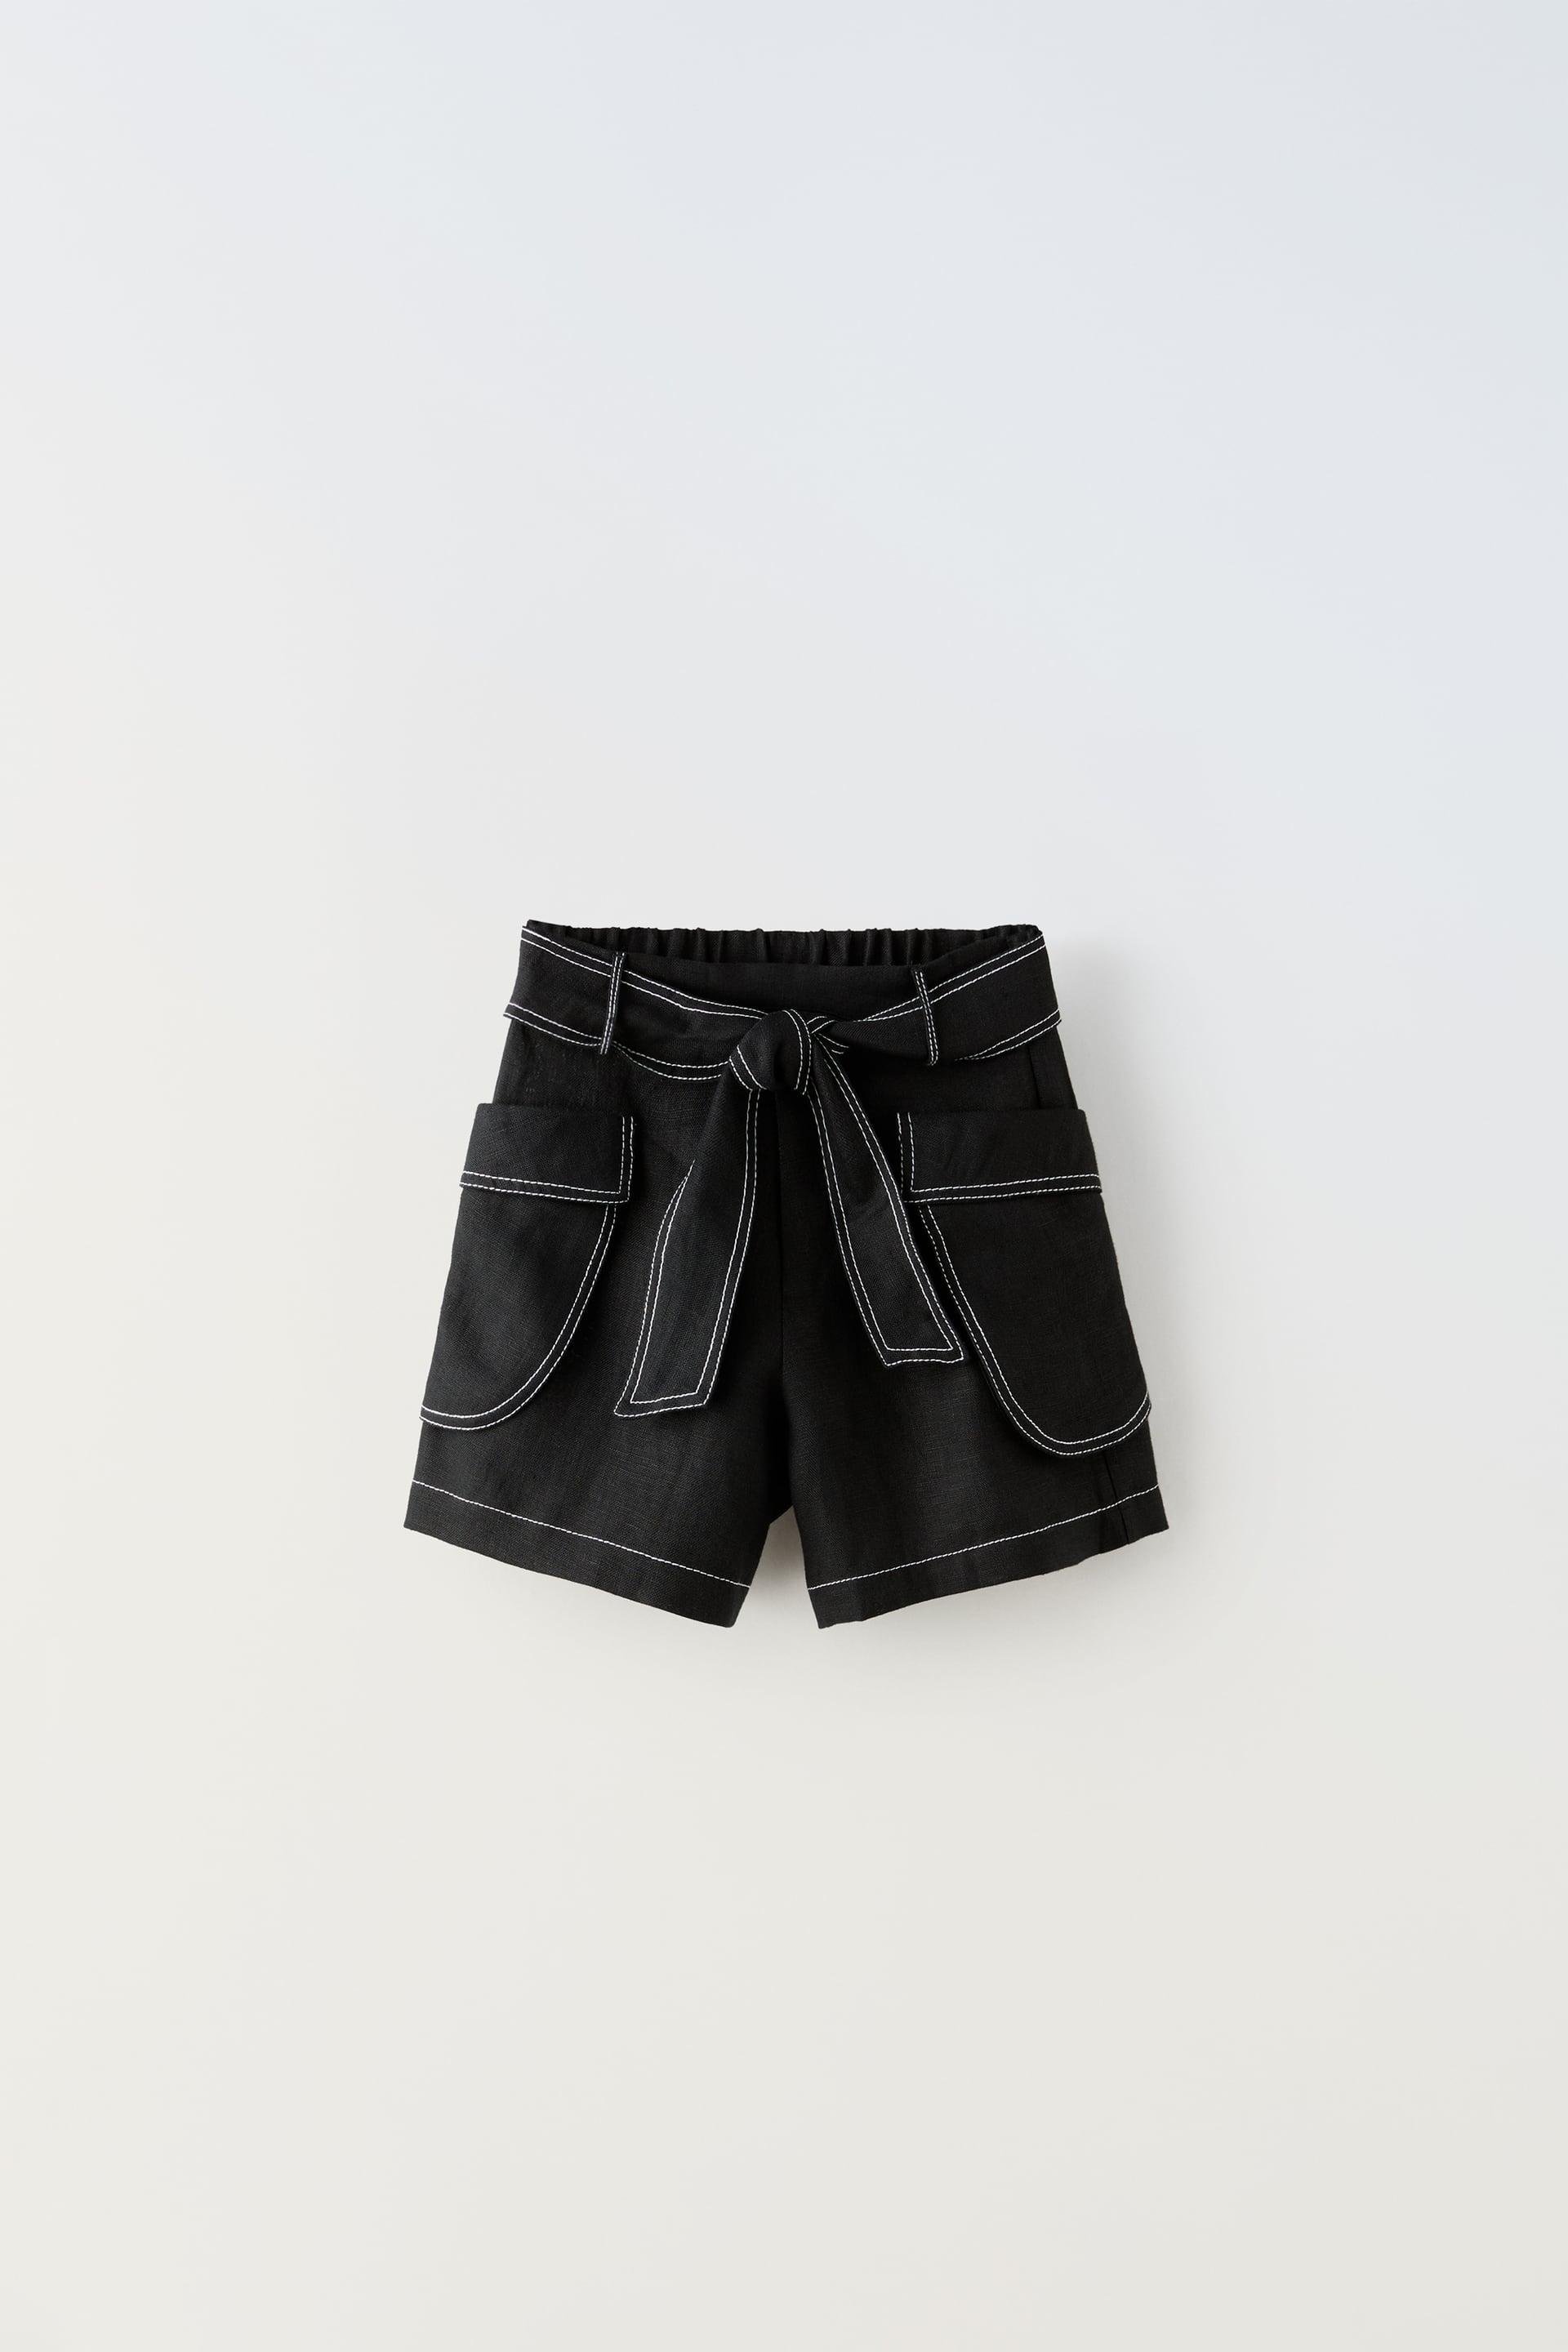 TOPSTITCHED LINEN SHORTS by ZARA